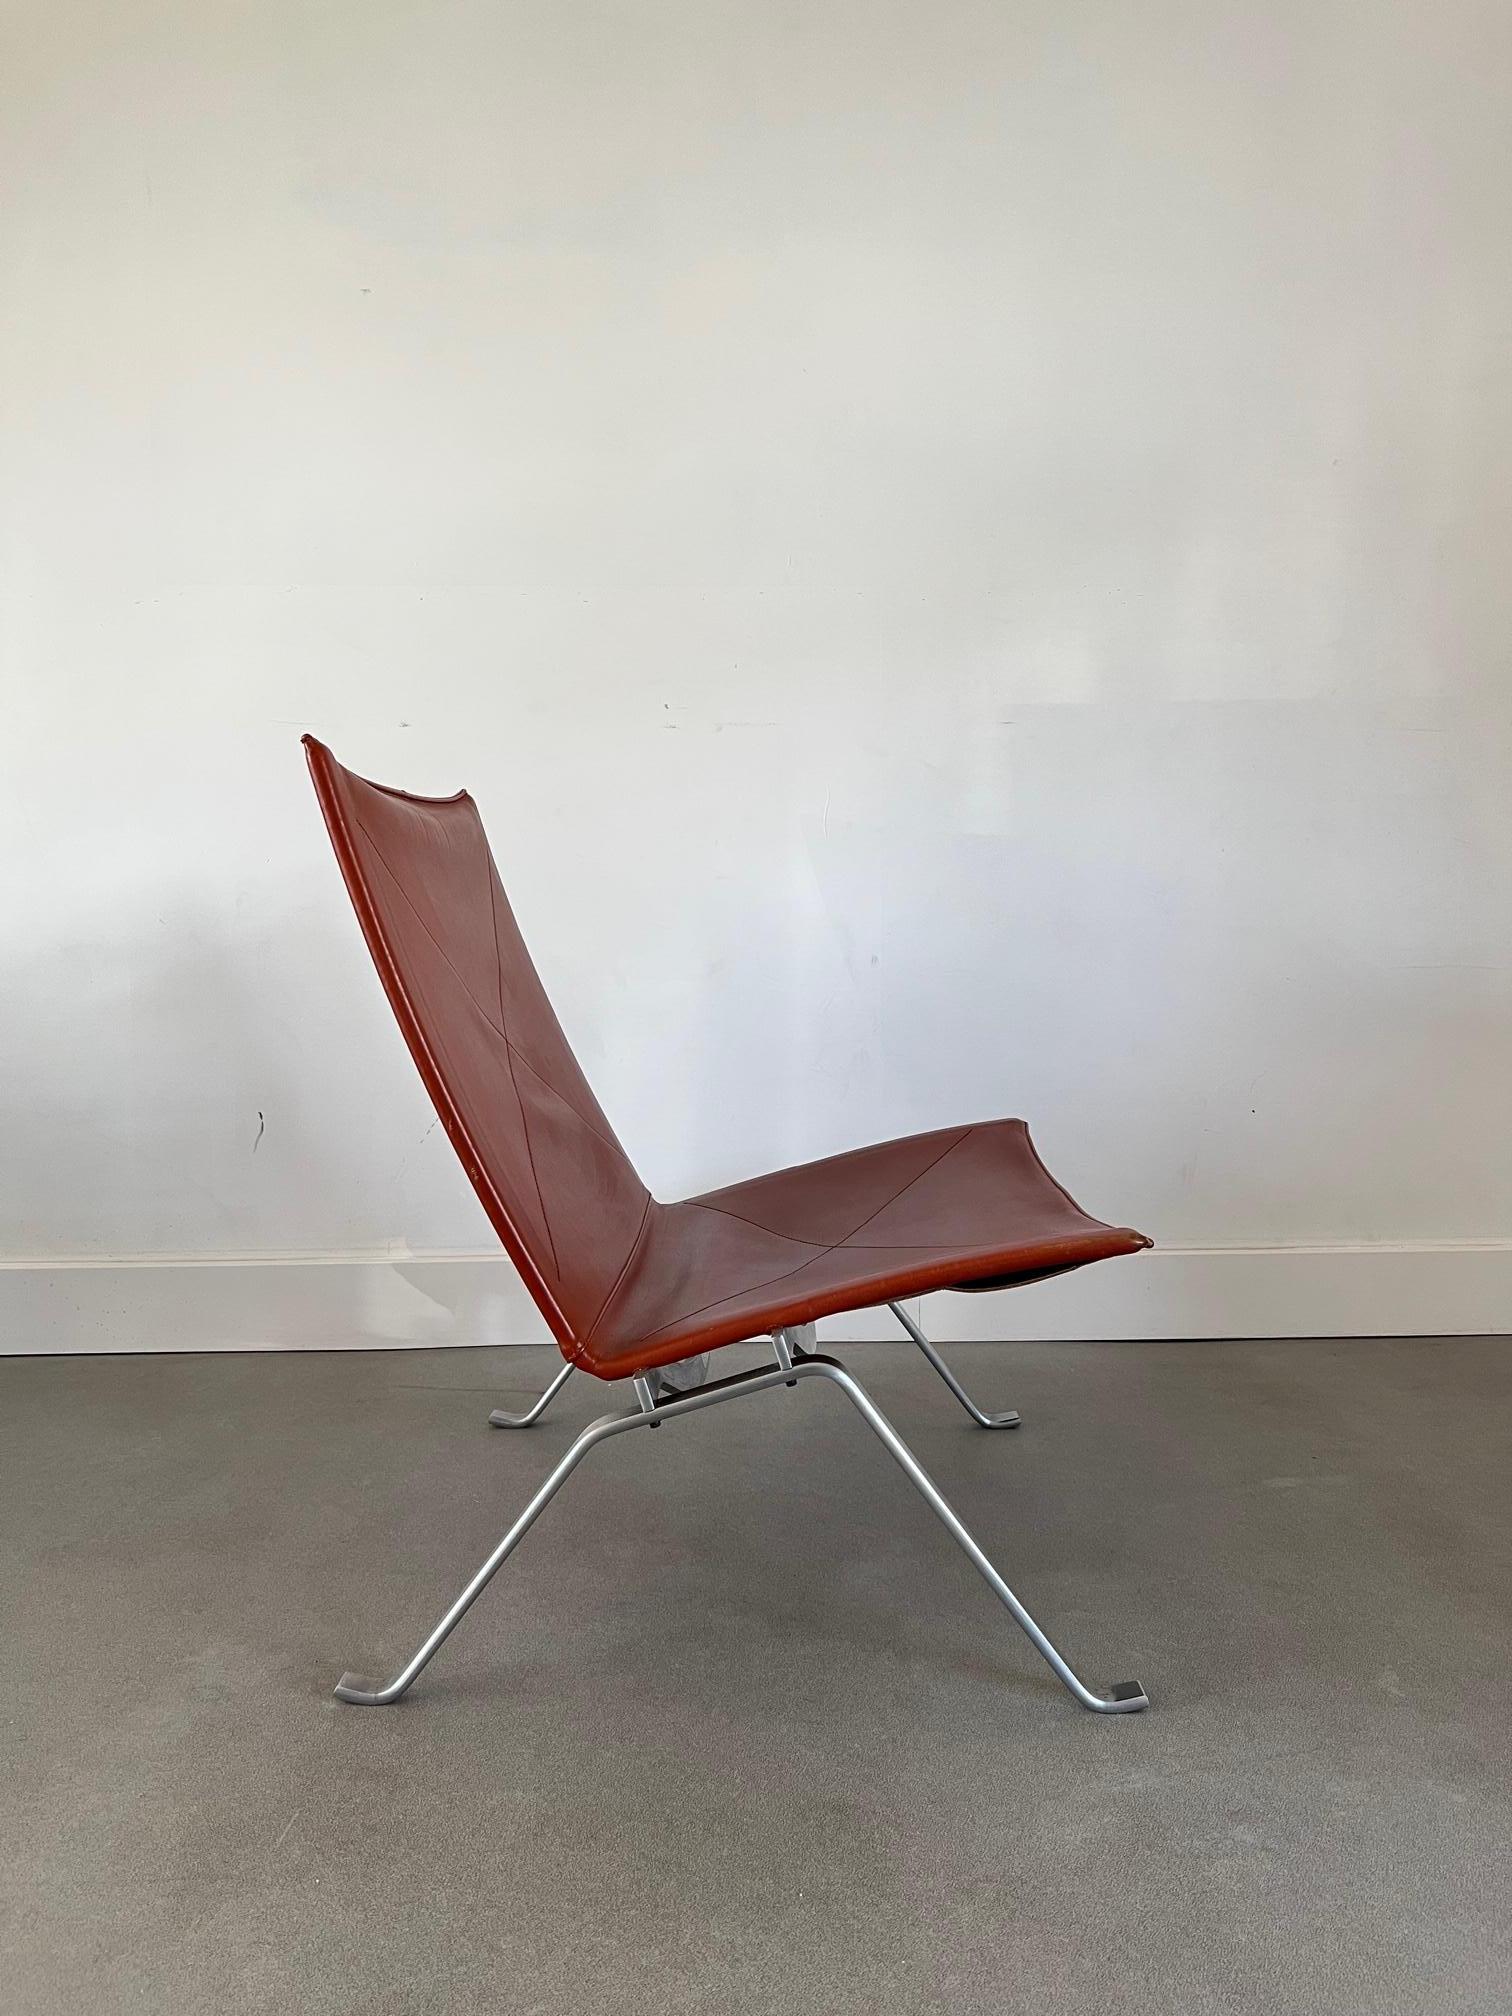 PK22 is a chair designed by the Danish furniture designer Poul Kjærholm in 1956. It is also known as the PK22 Lounge Chair. 

The PK22 chair was originally manufactured by E. Kold Christensen, a Danish furniture company that specialized in